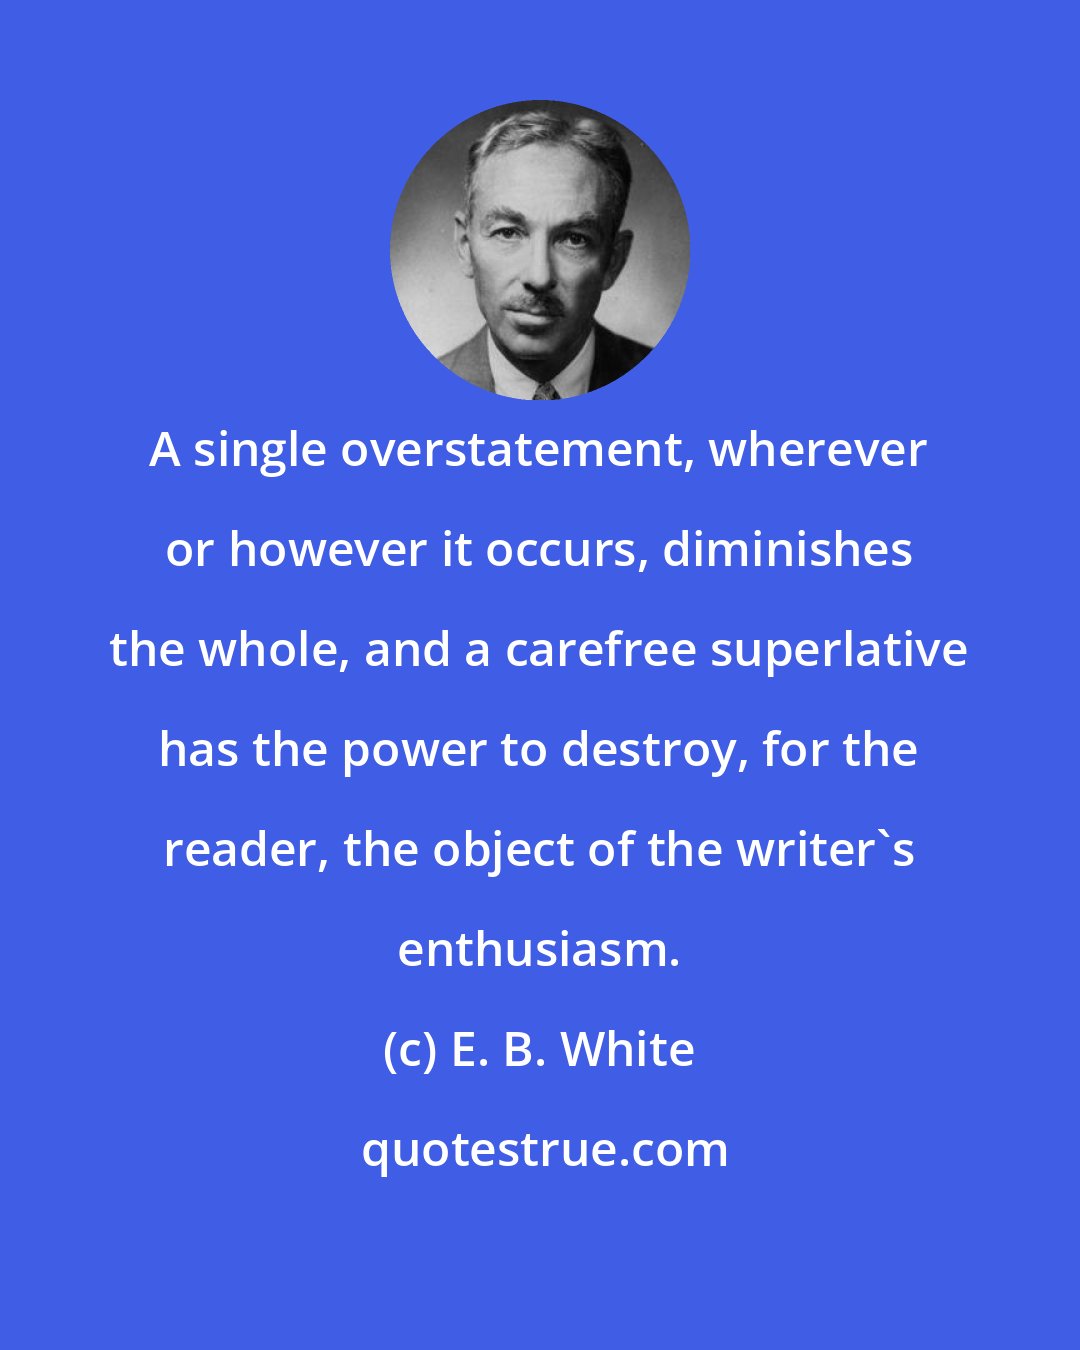 E. B. White: A single overstatement, wherever or however it occurs, diminishes the whole, and a carefree superlative has the power to destroy, for the reader, the object of the writer's enthusiasm.